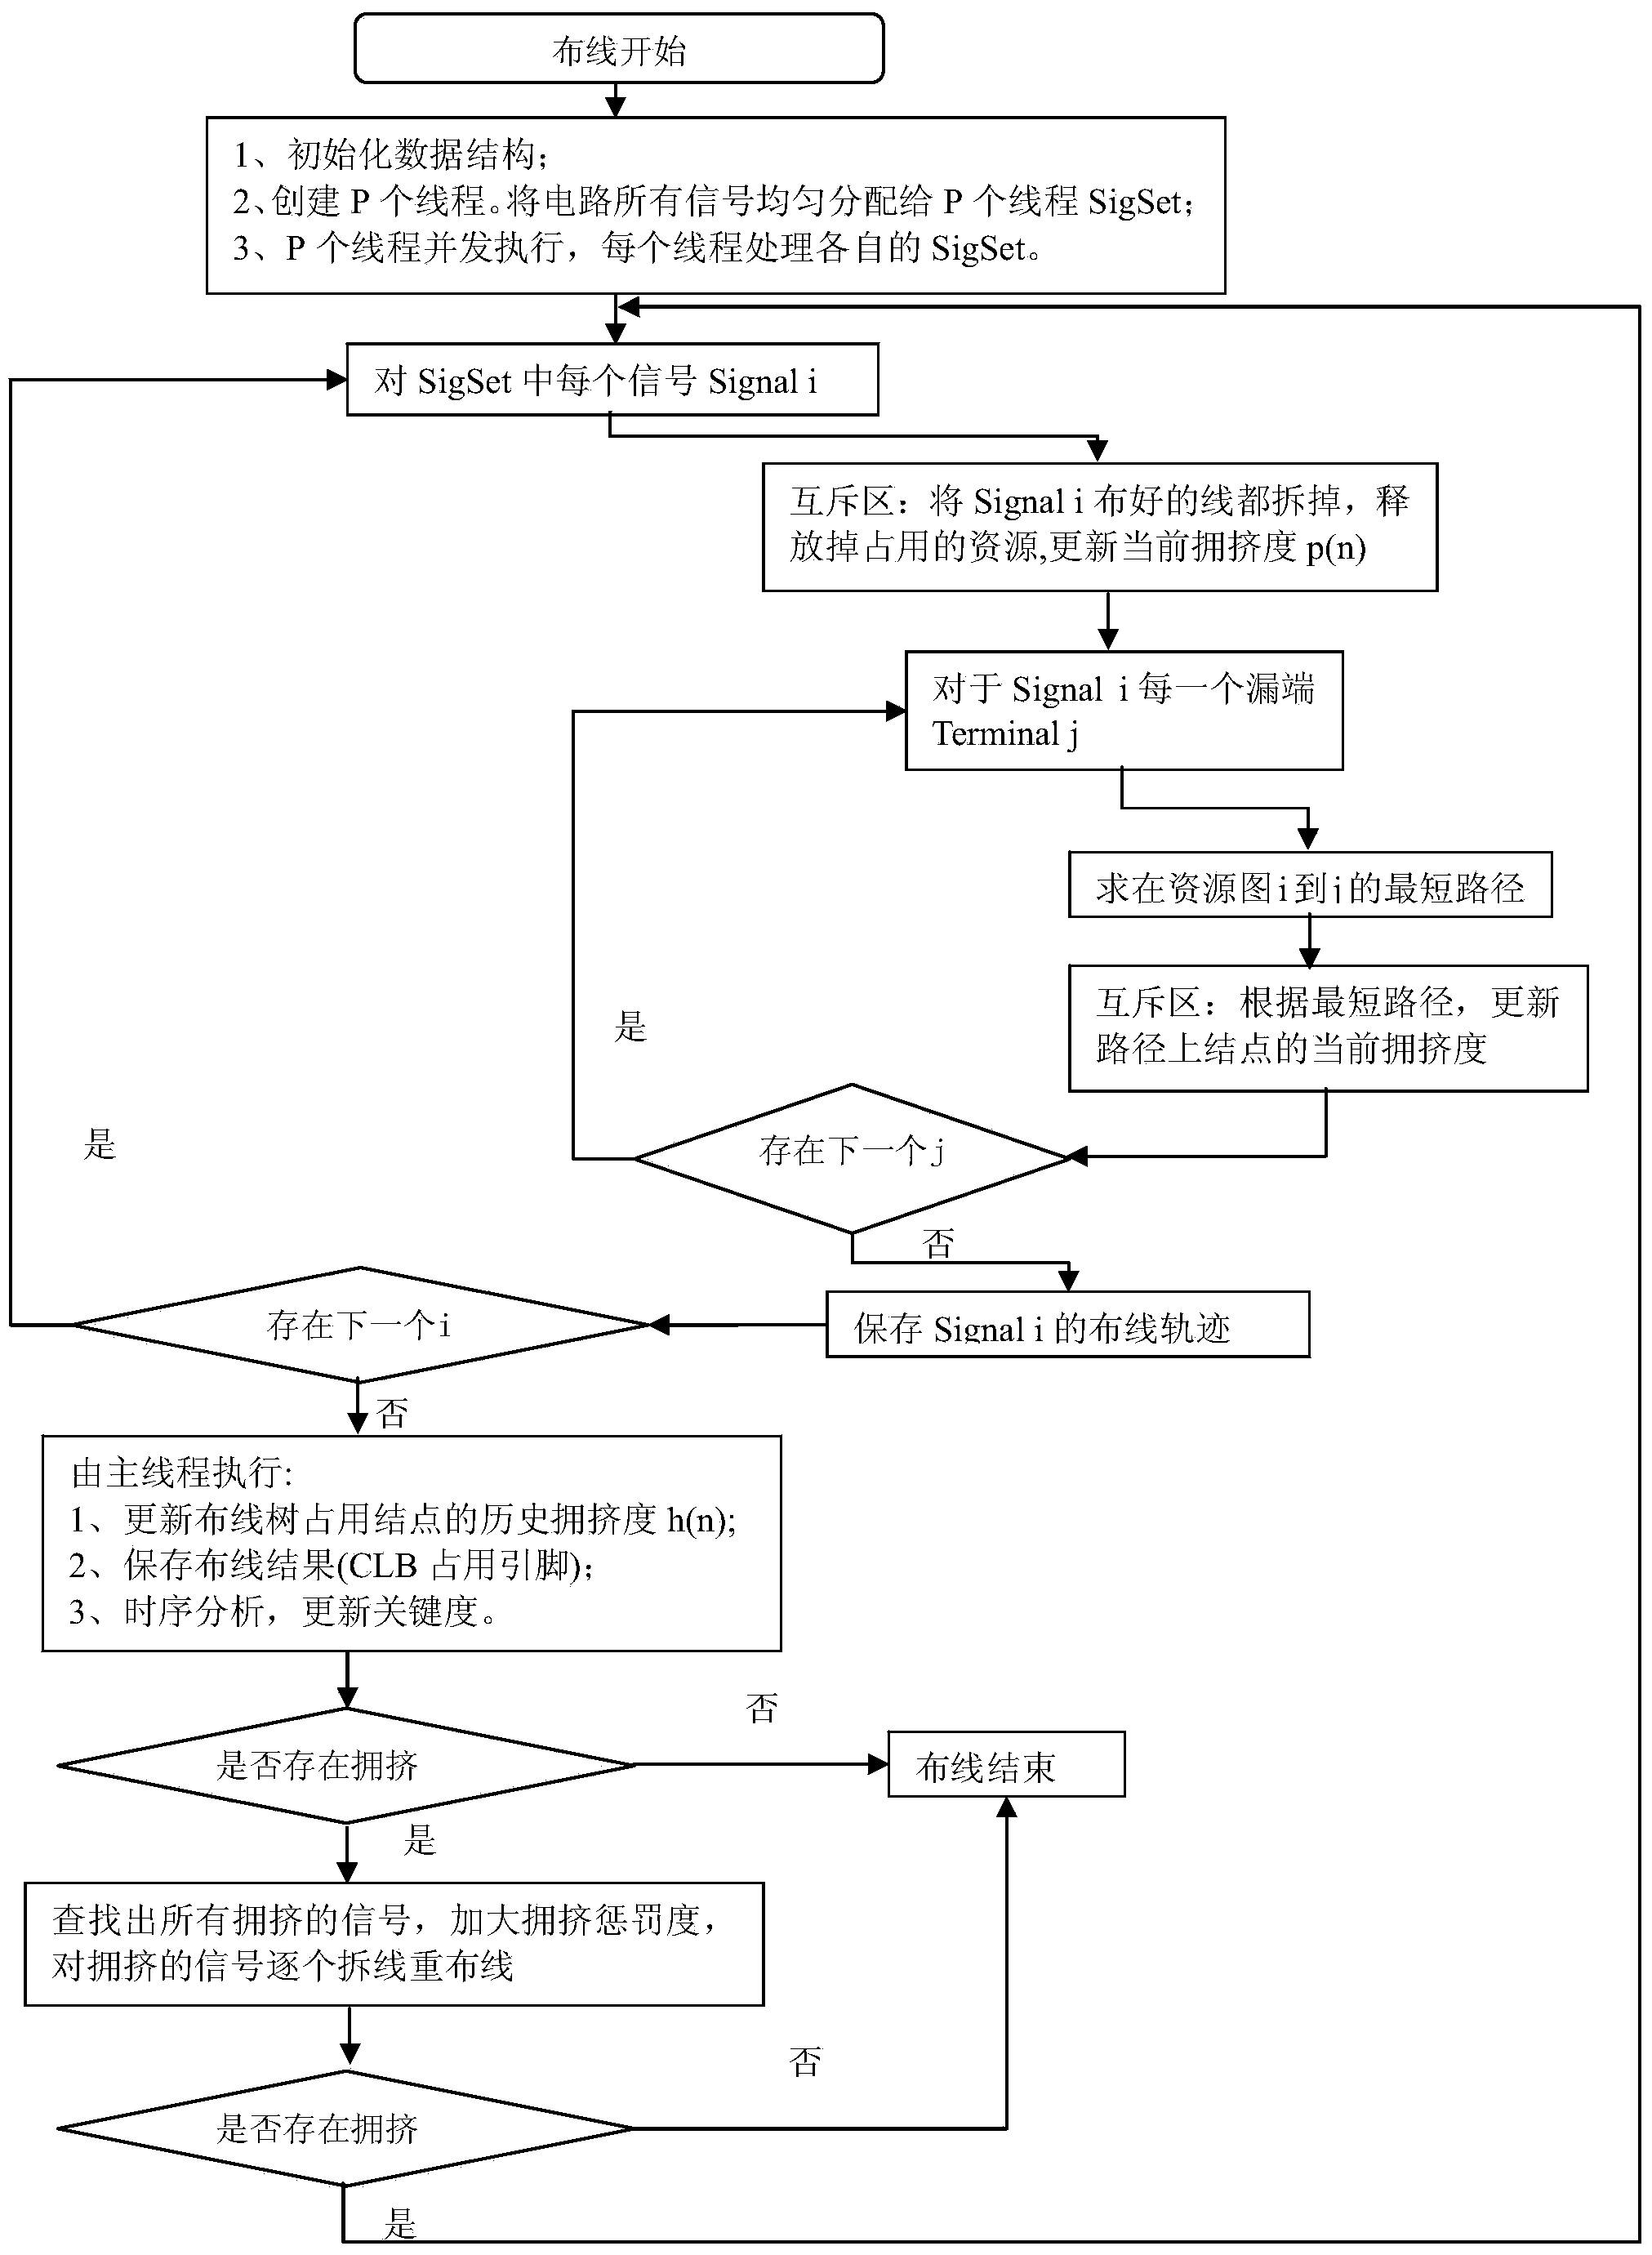 Method for implementing quick locating and wiring of field programmable gate array (FPGA)